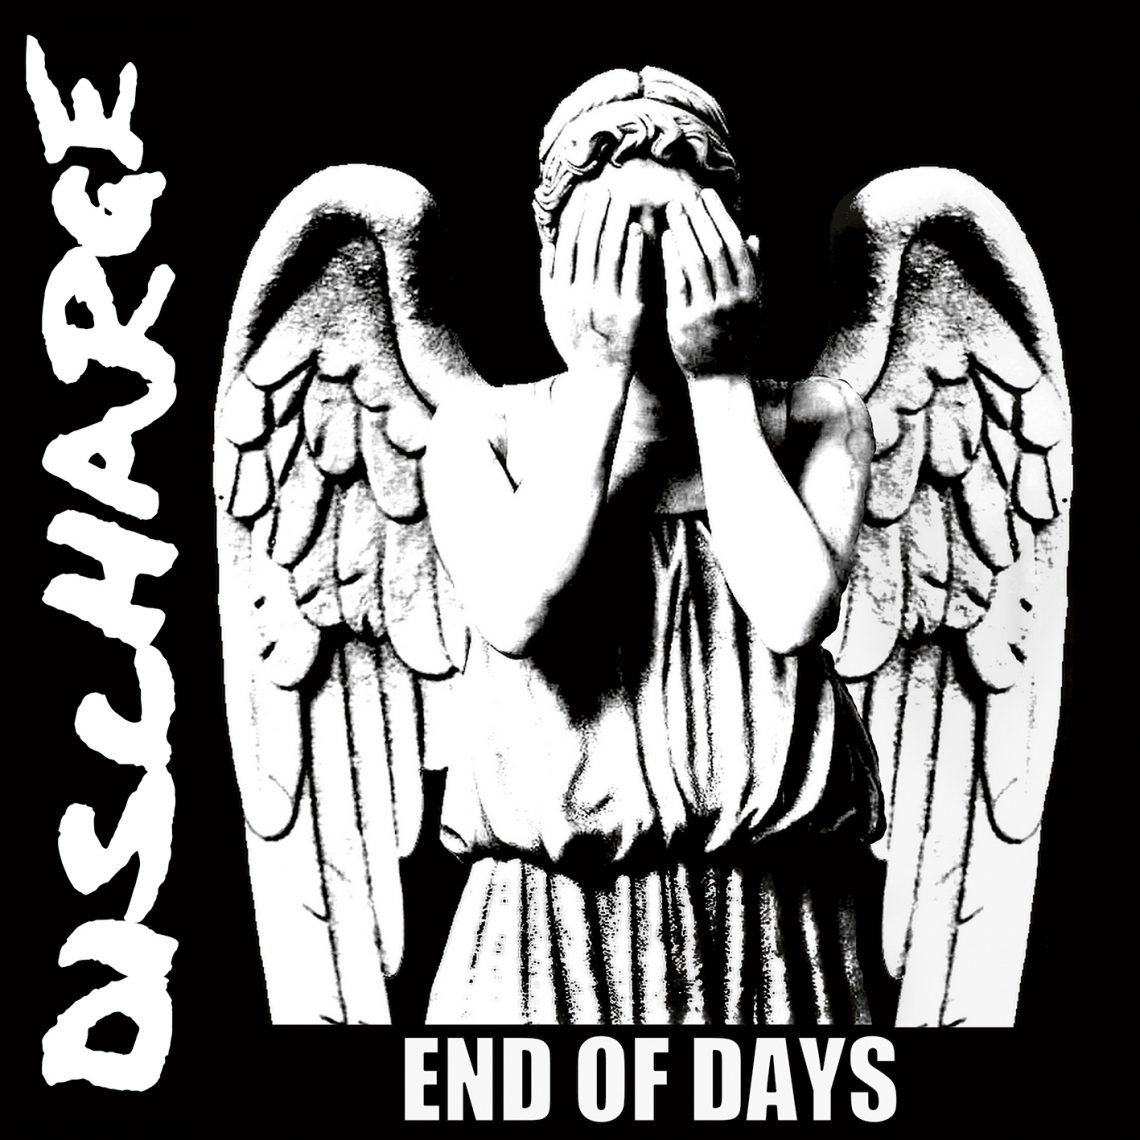 DISCHARGE Banned from Canada; plays final Canadian show!